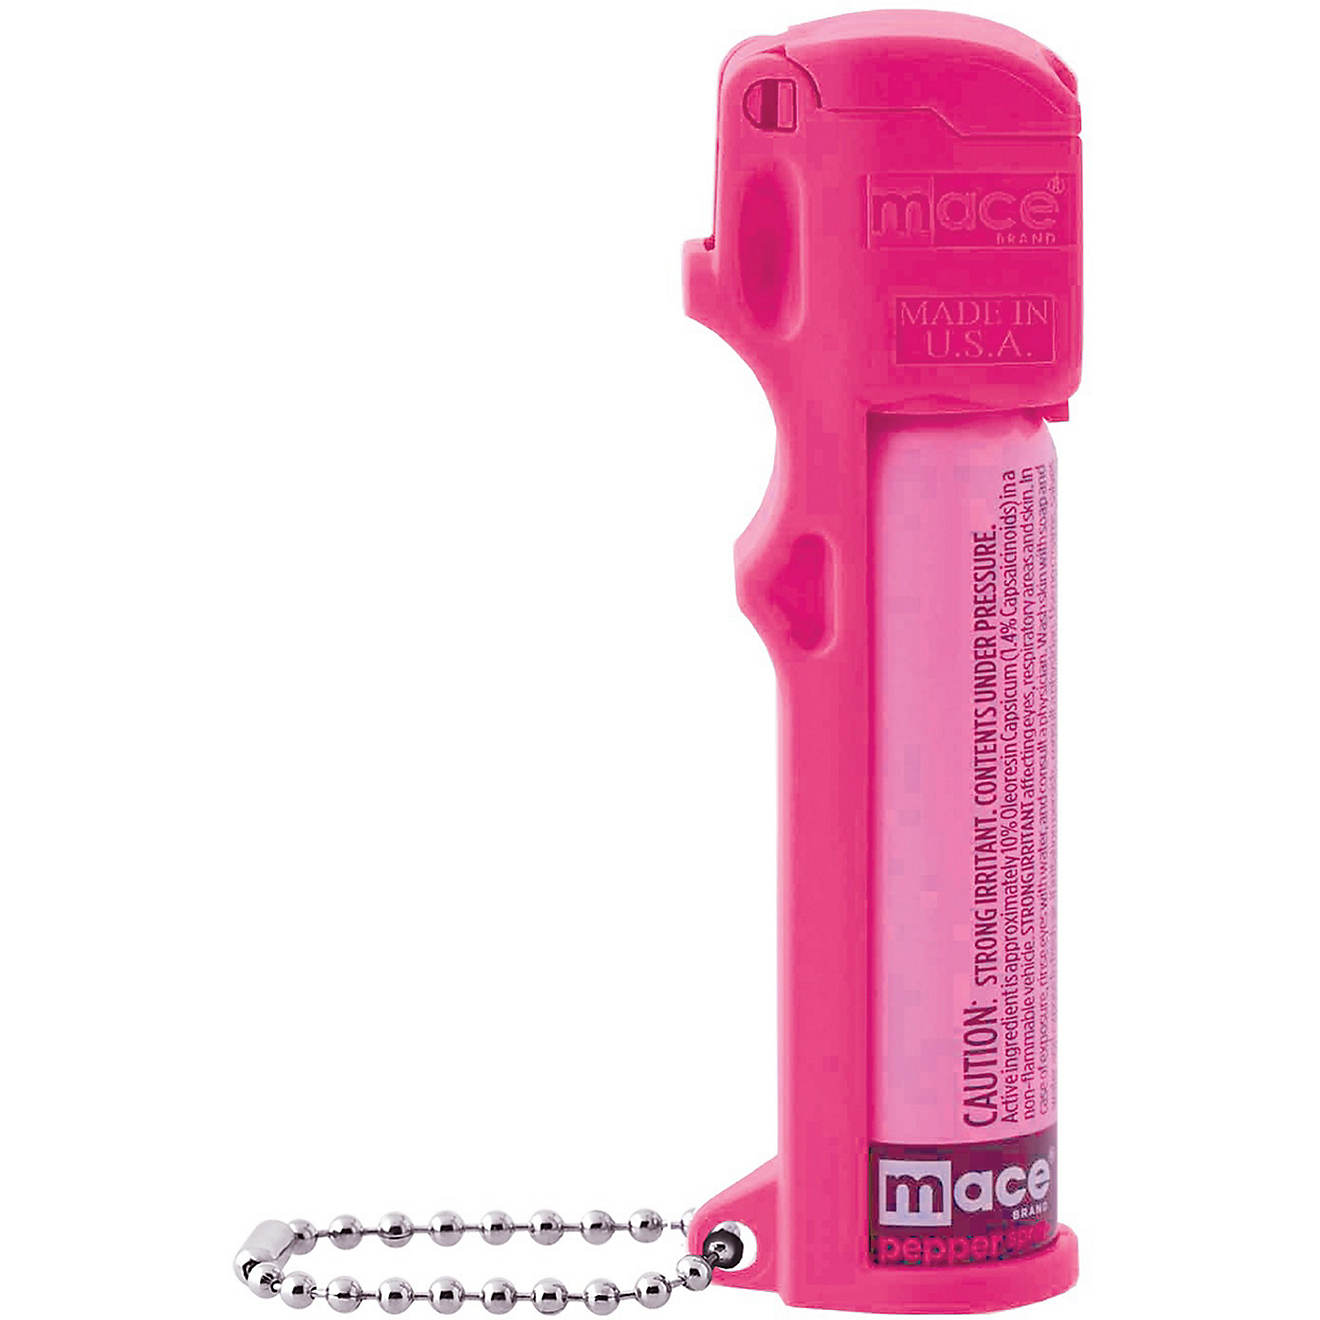 Mace Personal Model Pepper Spray                                                                                                 - view number 1